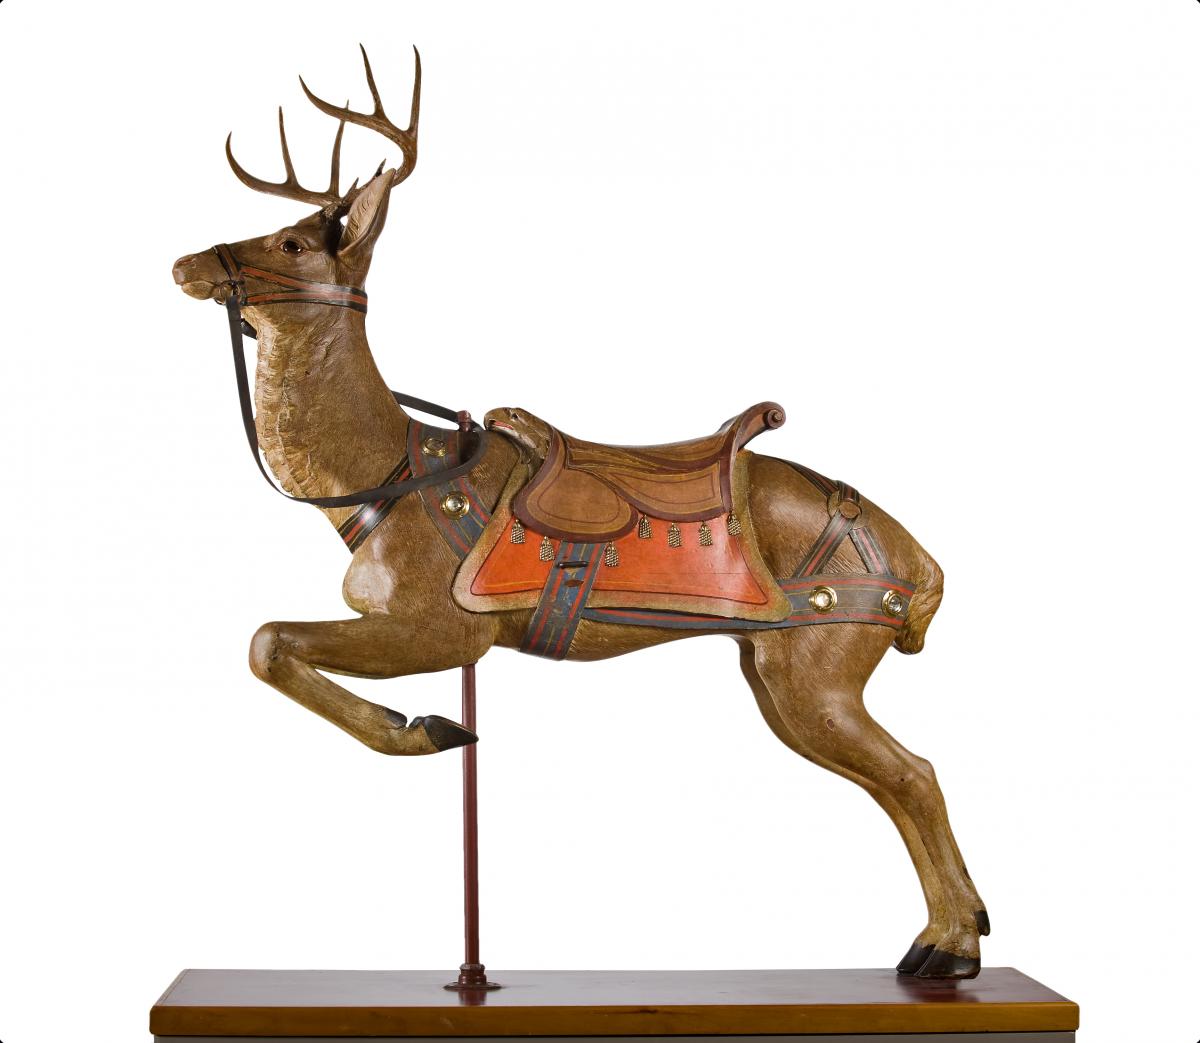 Photograph of a wooden carved deer